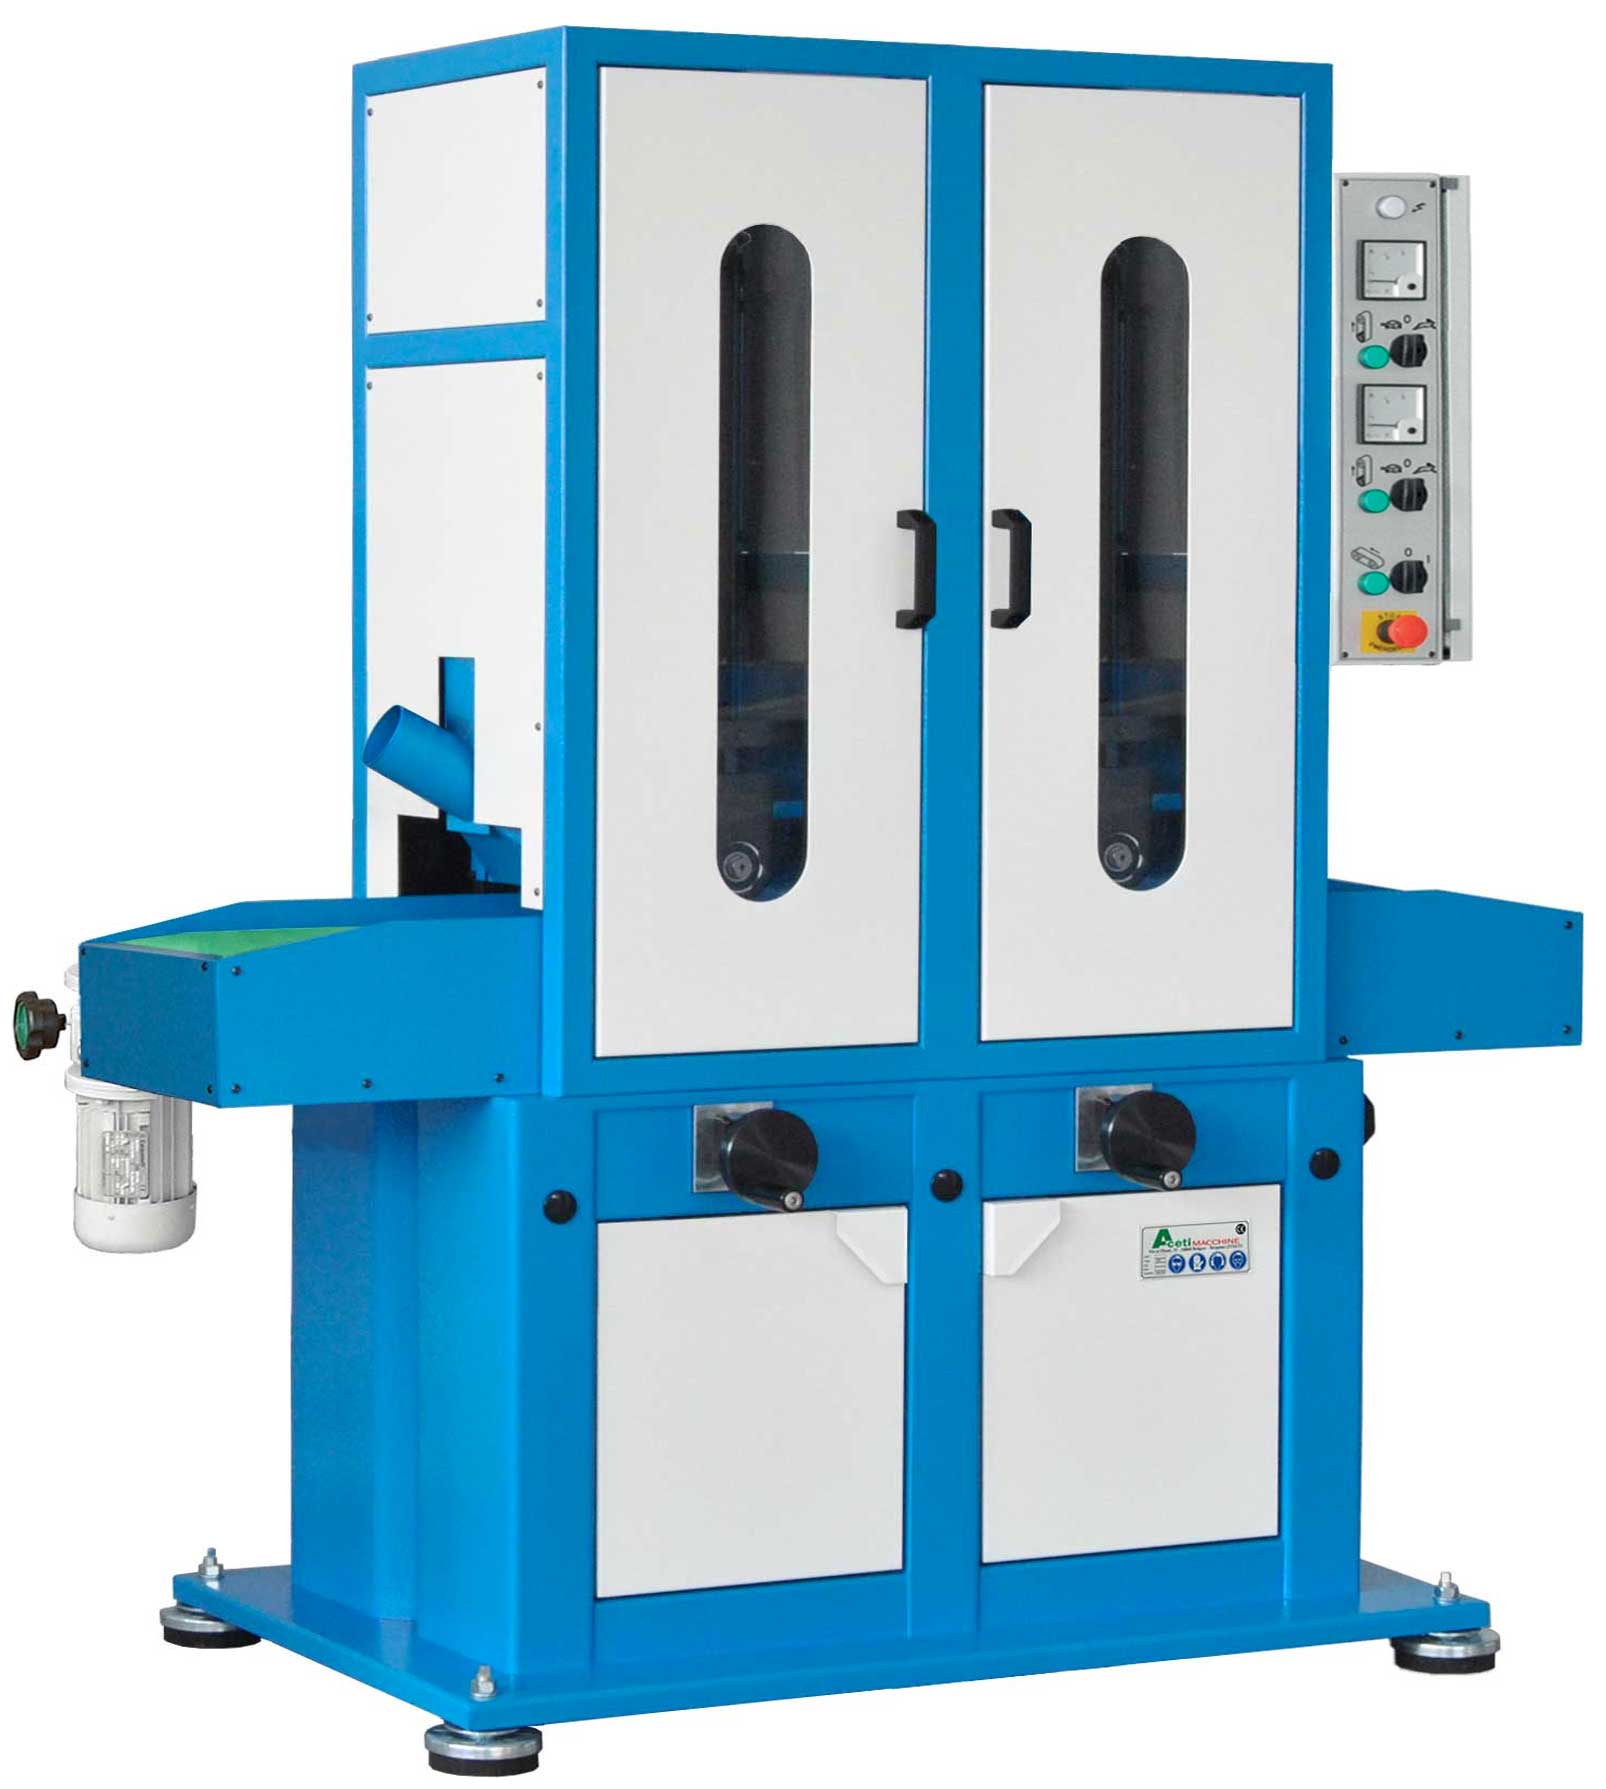 ART.97-2N - Polishing machine for flat surfaces by dry system | 2 Belt grinding units - stp